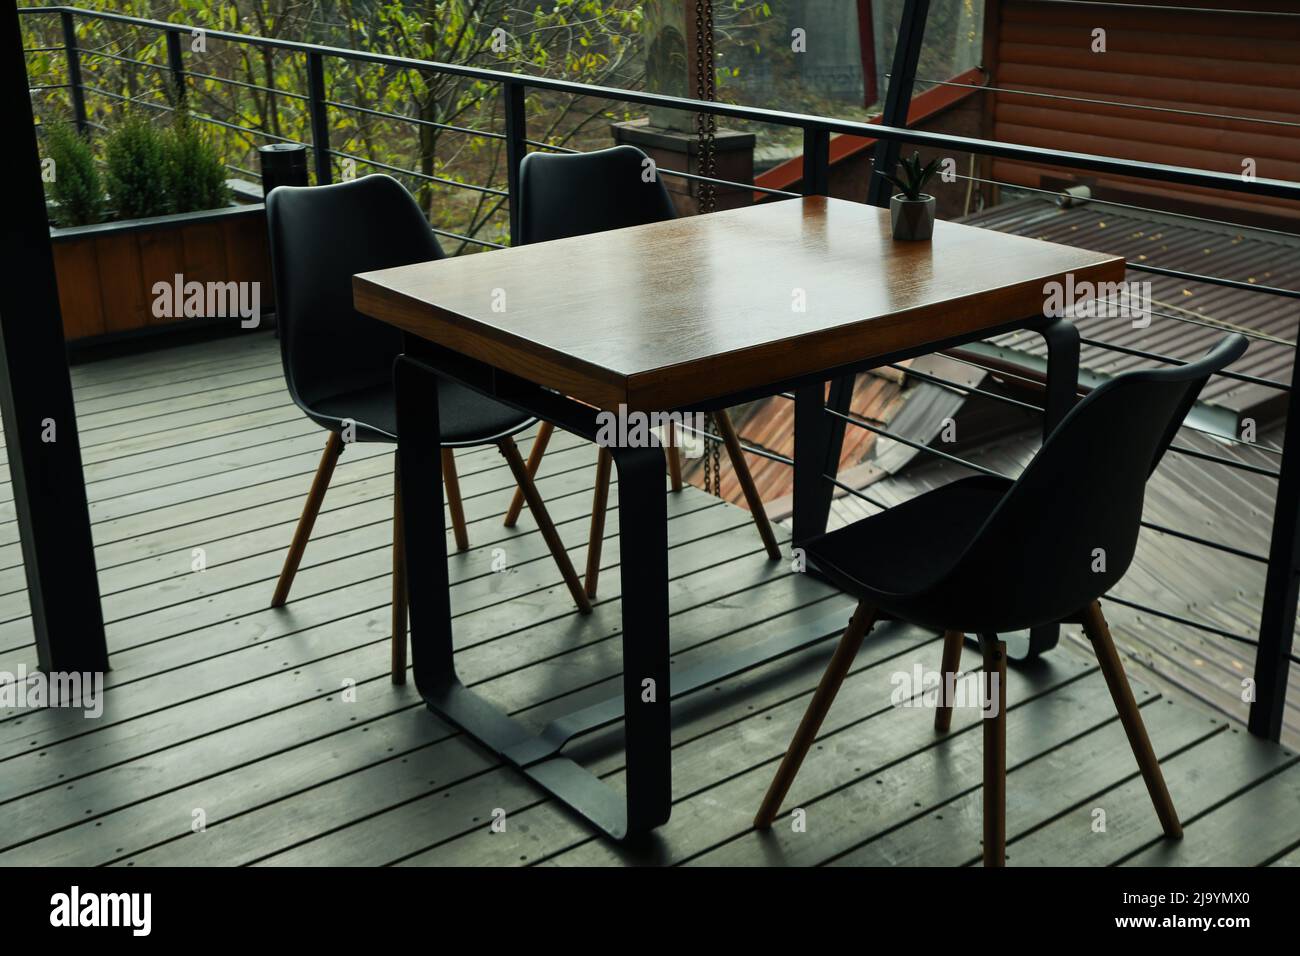 Table with chairs in stylish wooden restaurant Stock Photo